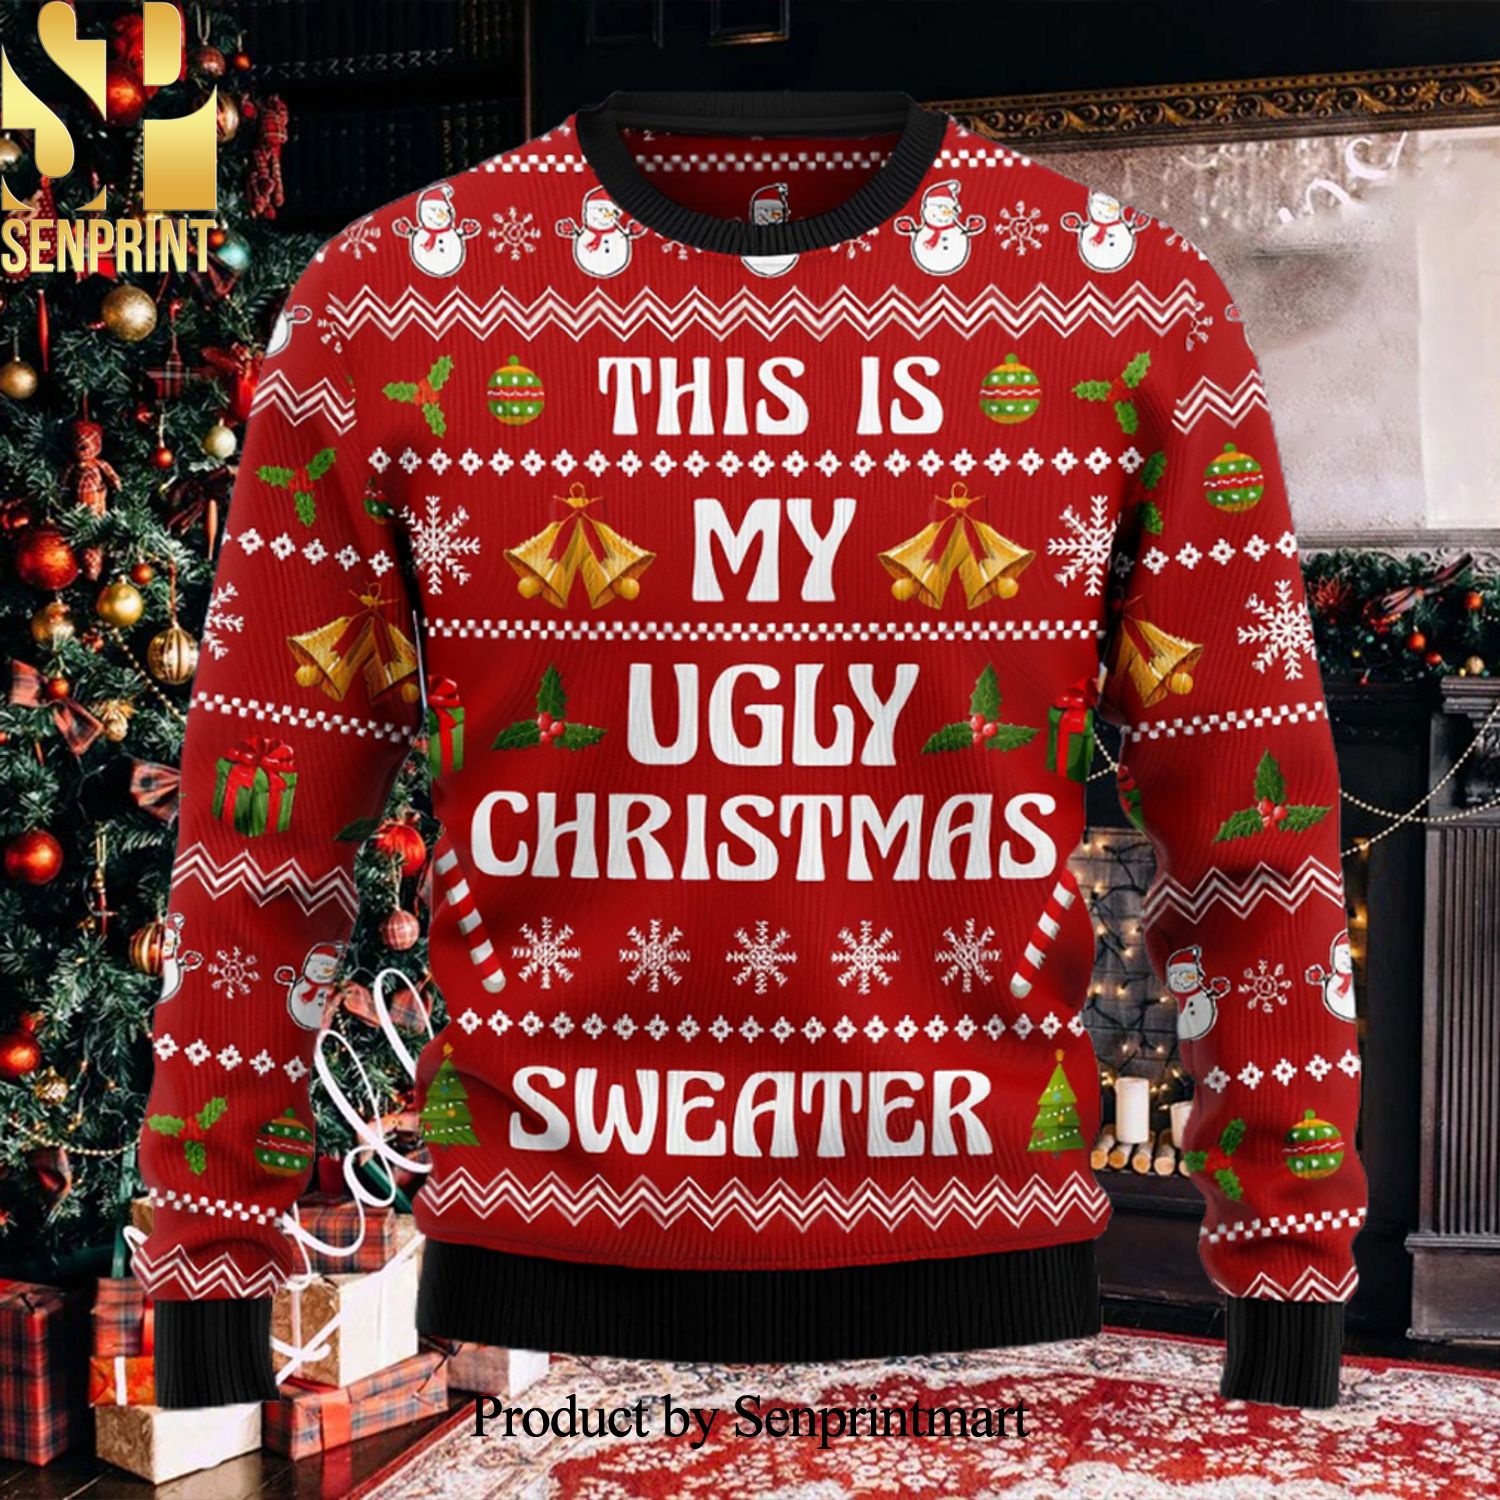 This Is My Ugly Christmas Sweater